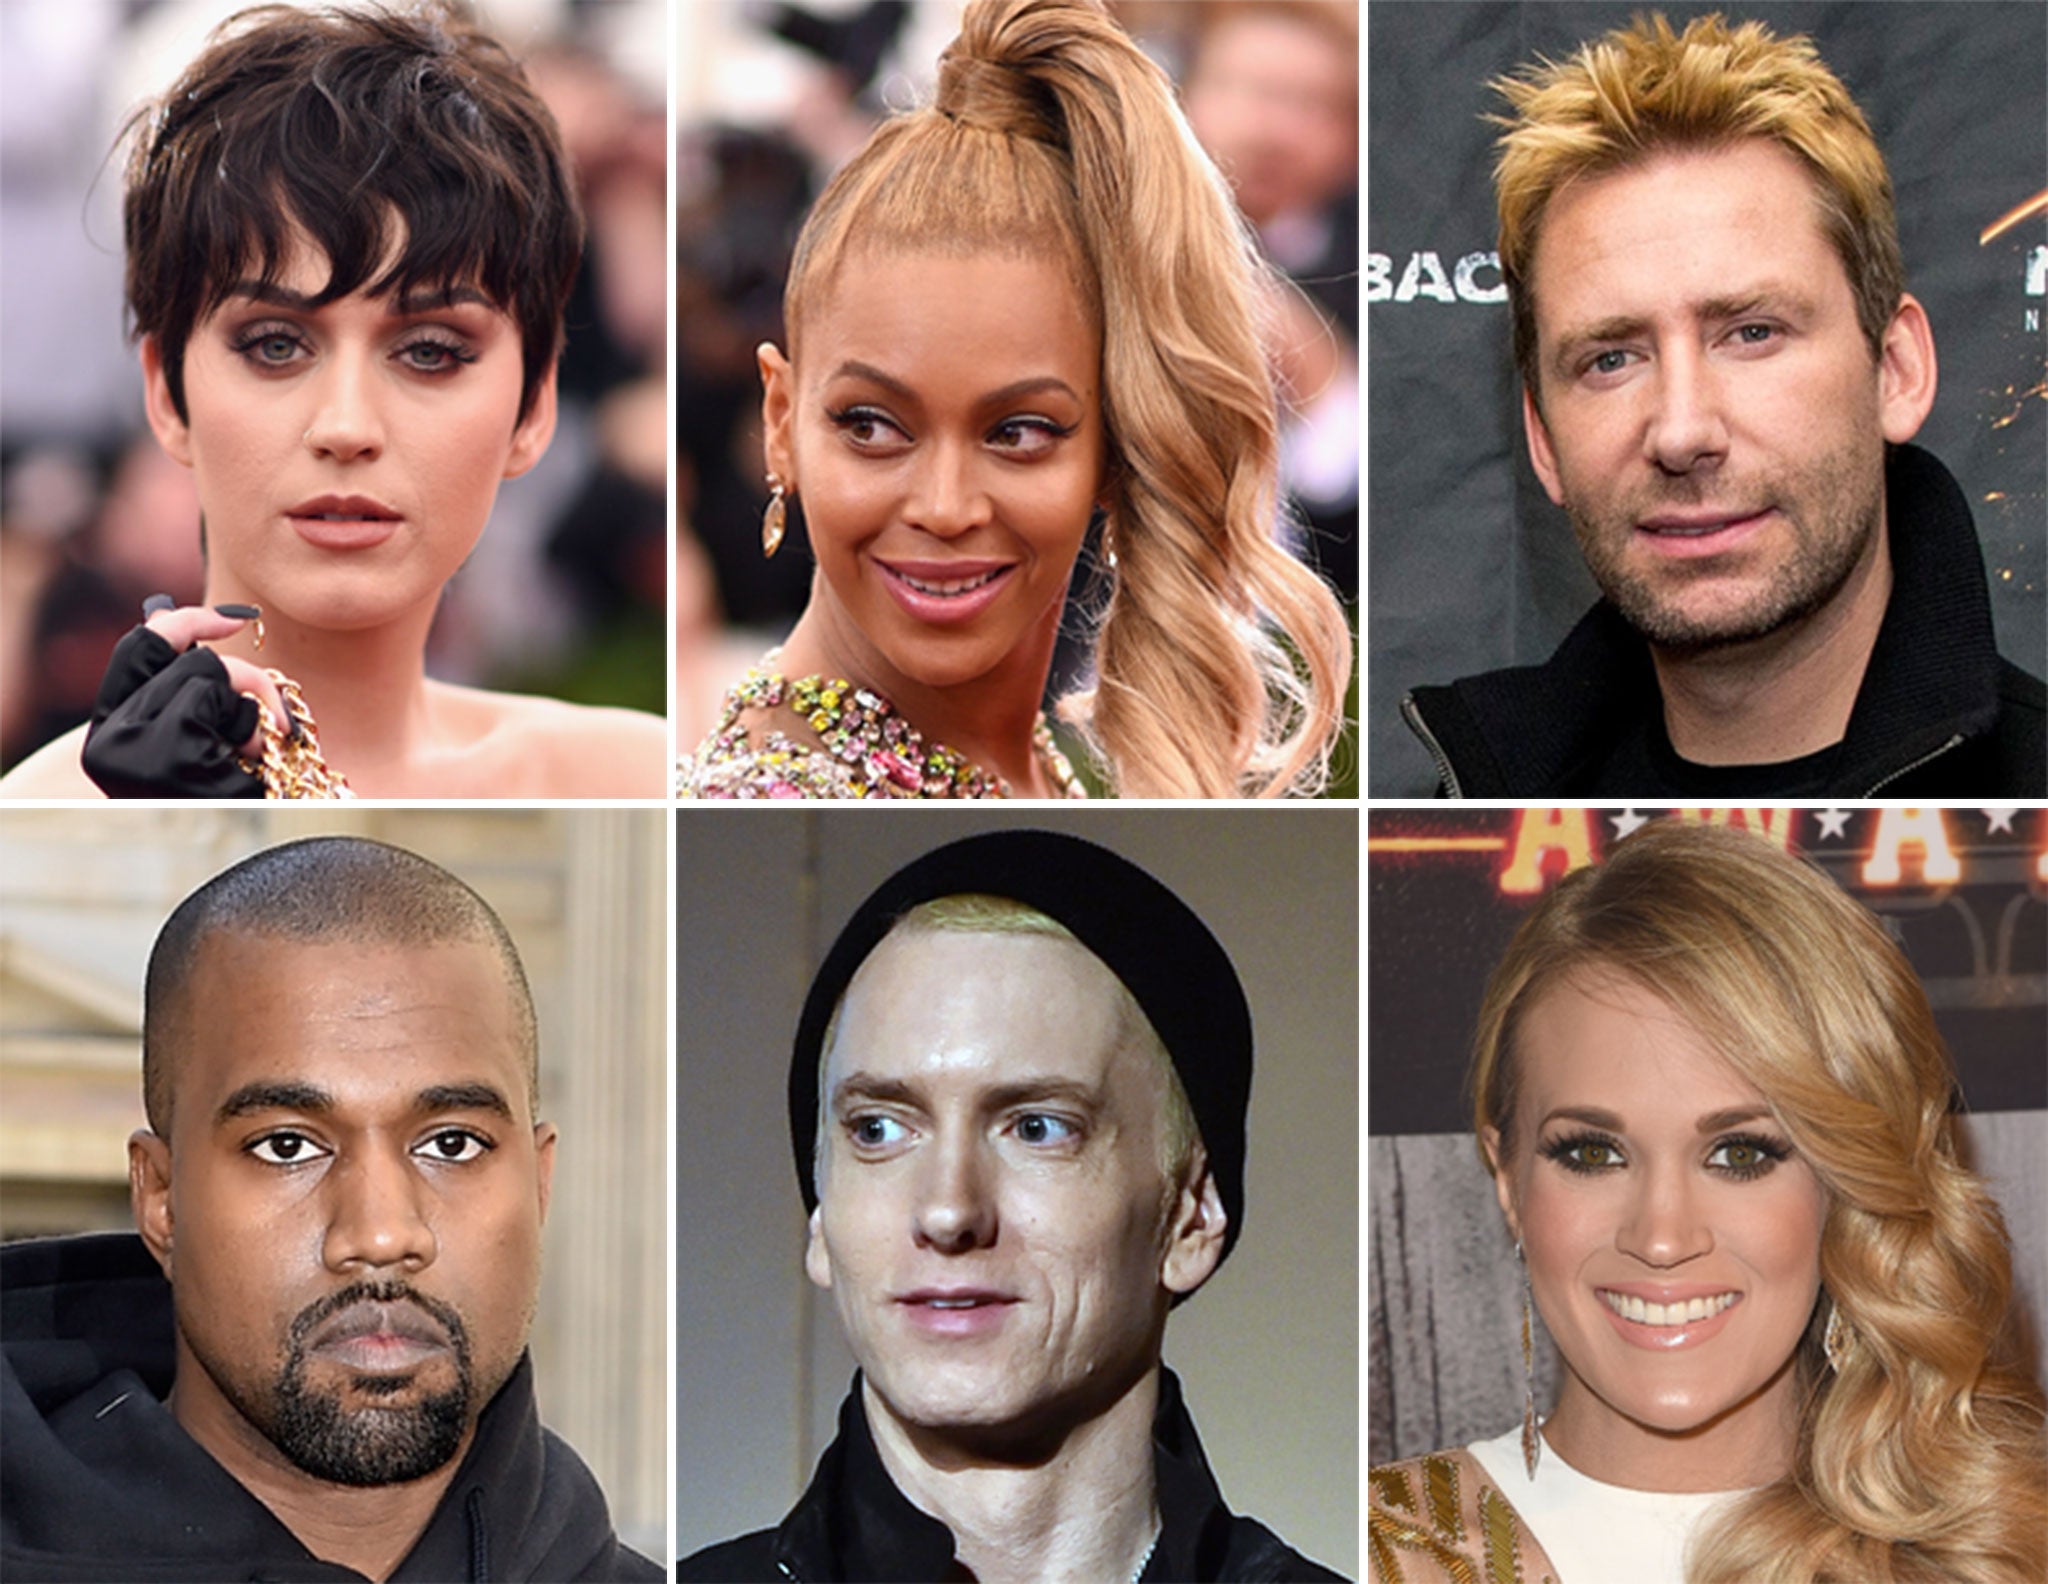 Top row left to right: Katy Perry, Beyonce, Chad Kroeger. Bottom row left to right: Kanye West, Eminem, Carrie Underwood